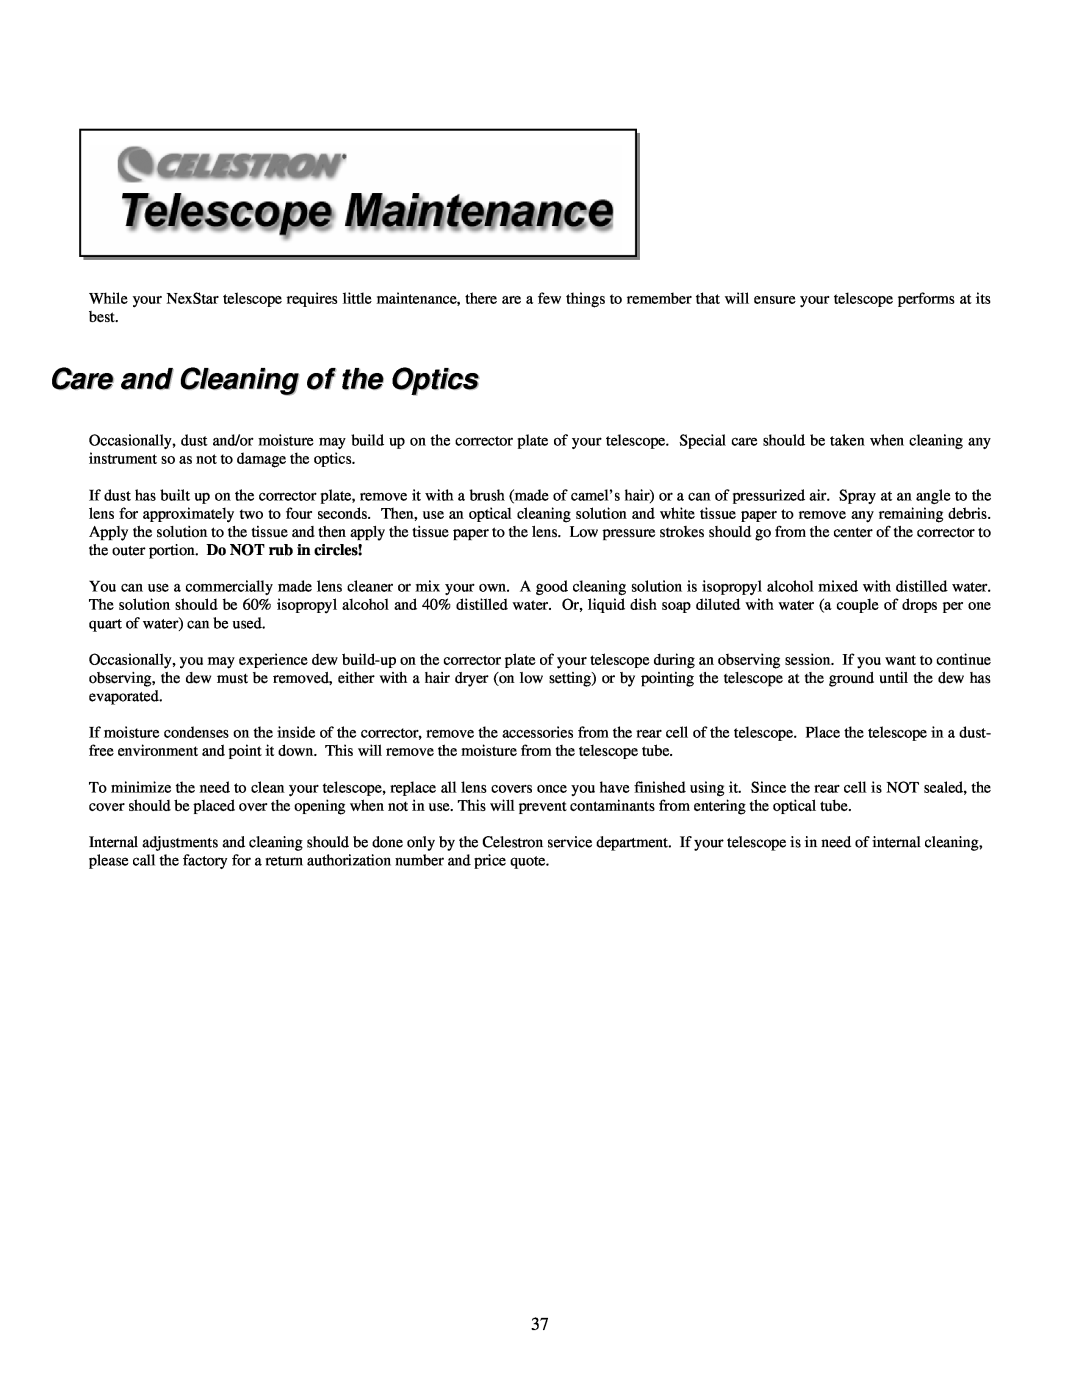 Celestron 4SE instruction manual Care and Cleaning of the Optics 